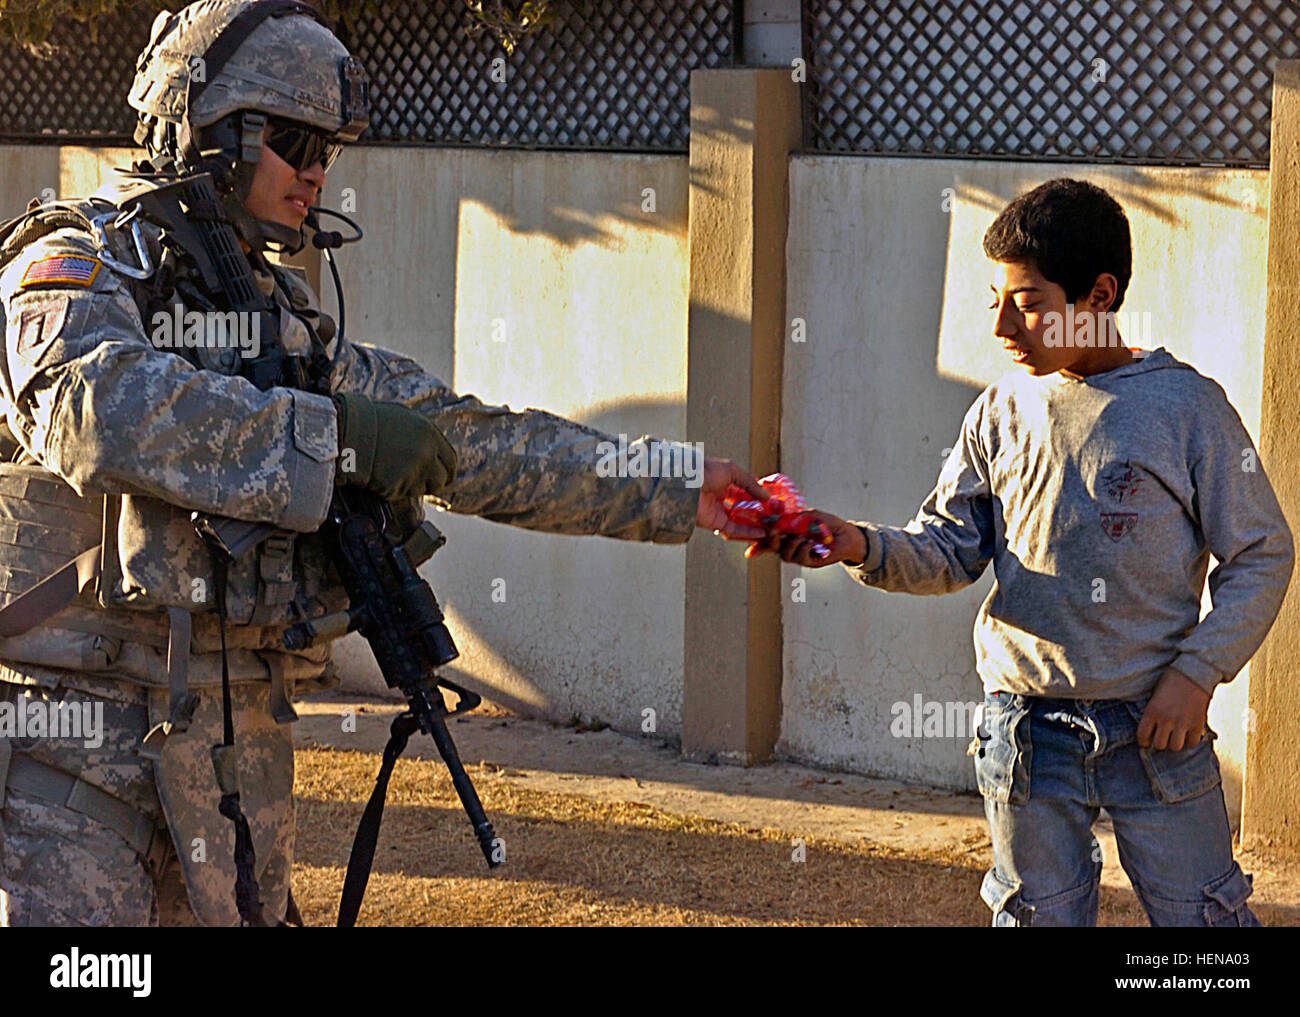 Sgt. Domingo Sagolili, a cavalry scout in 1st Platoon, Troop I, 3rd Squadron, 3d Armored Cavalry Regiment from Fort Hood, Texas, hands an Iraqi boy a bag of candy canes during a patrol in Mosul, Iraq, Feb. 4. Iron Hawk Soldiers maintain good relations with people of Mosul 76378 Stock Photo